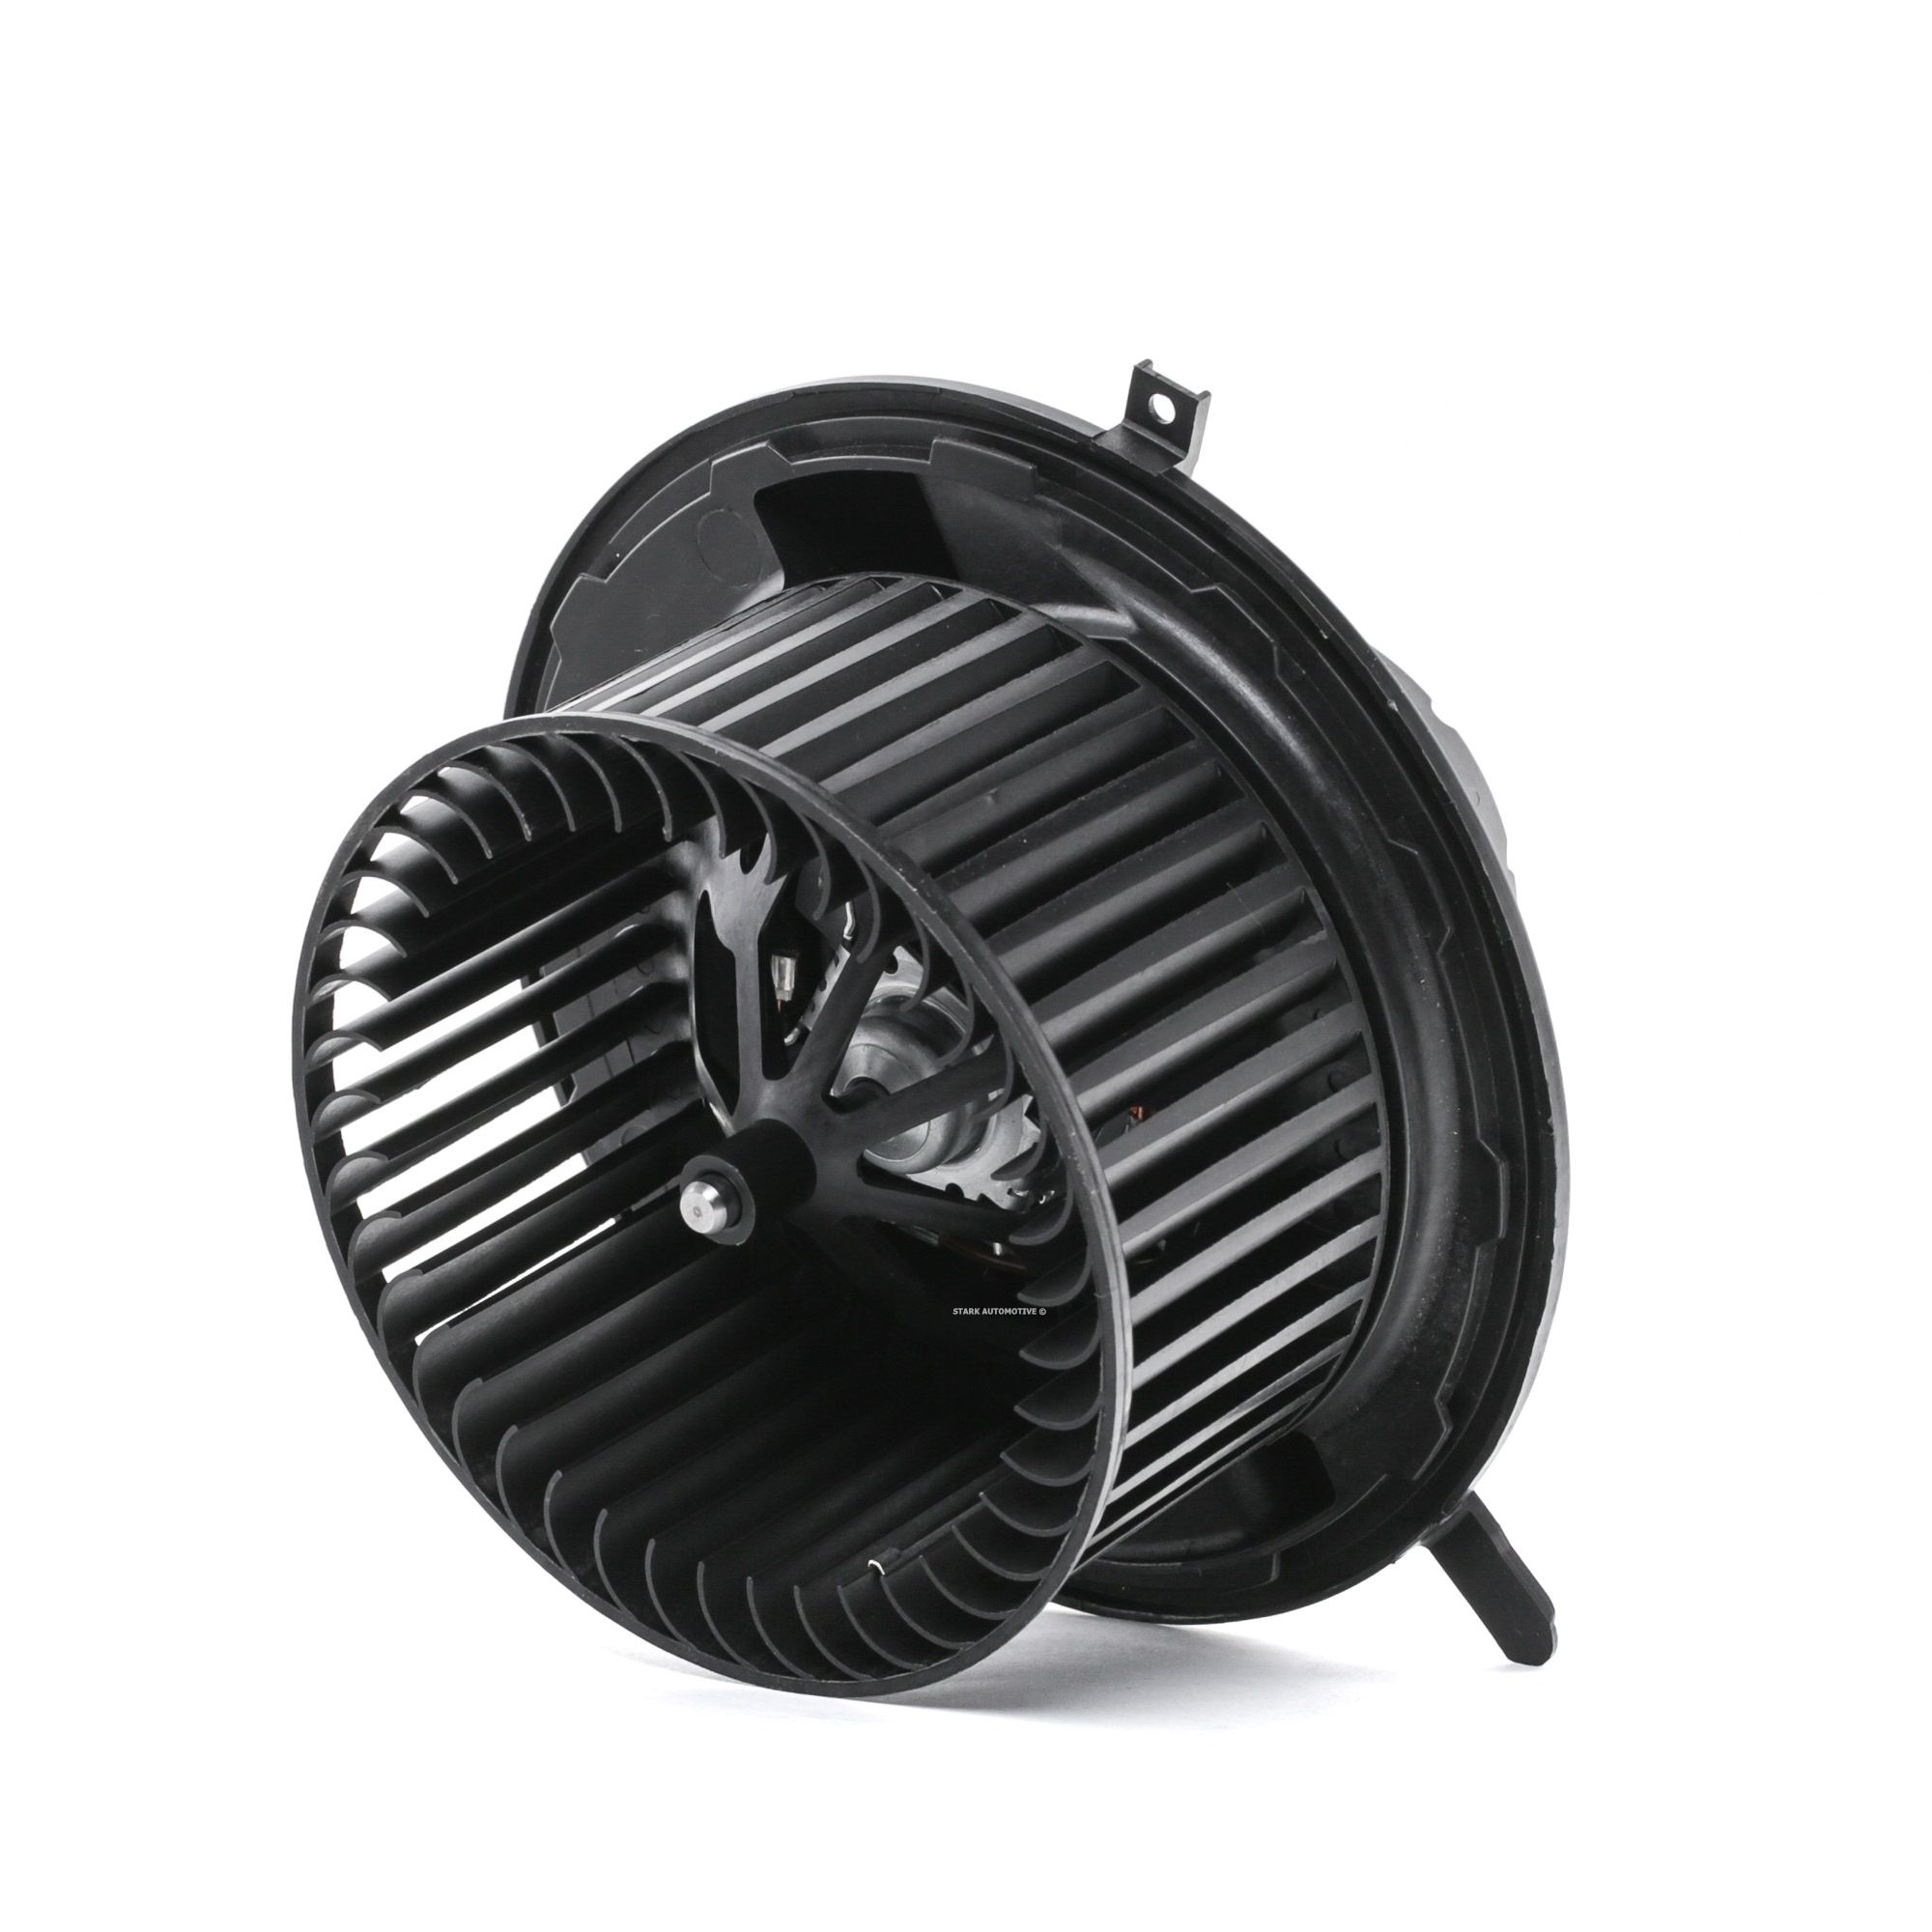 SKIB-0310066 STARK Heater blower motor SAAB for vehicles with air conditioning (manually controlled), without integrated regulator